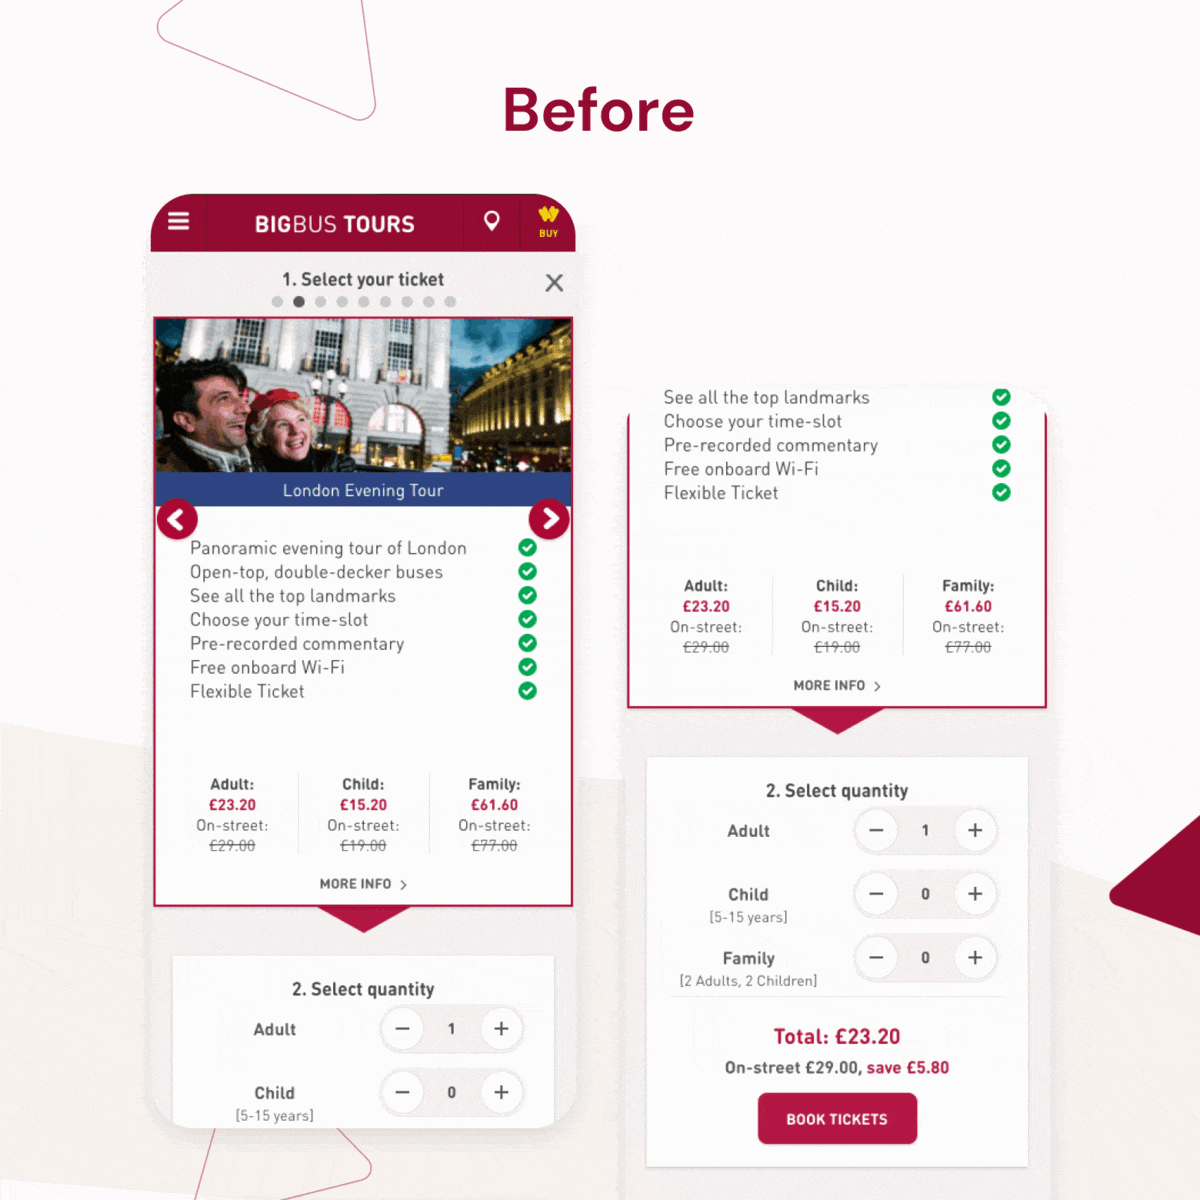 Big Bus Tours' product page before and after their digital transformation project